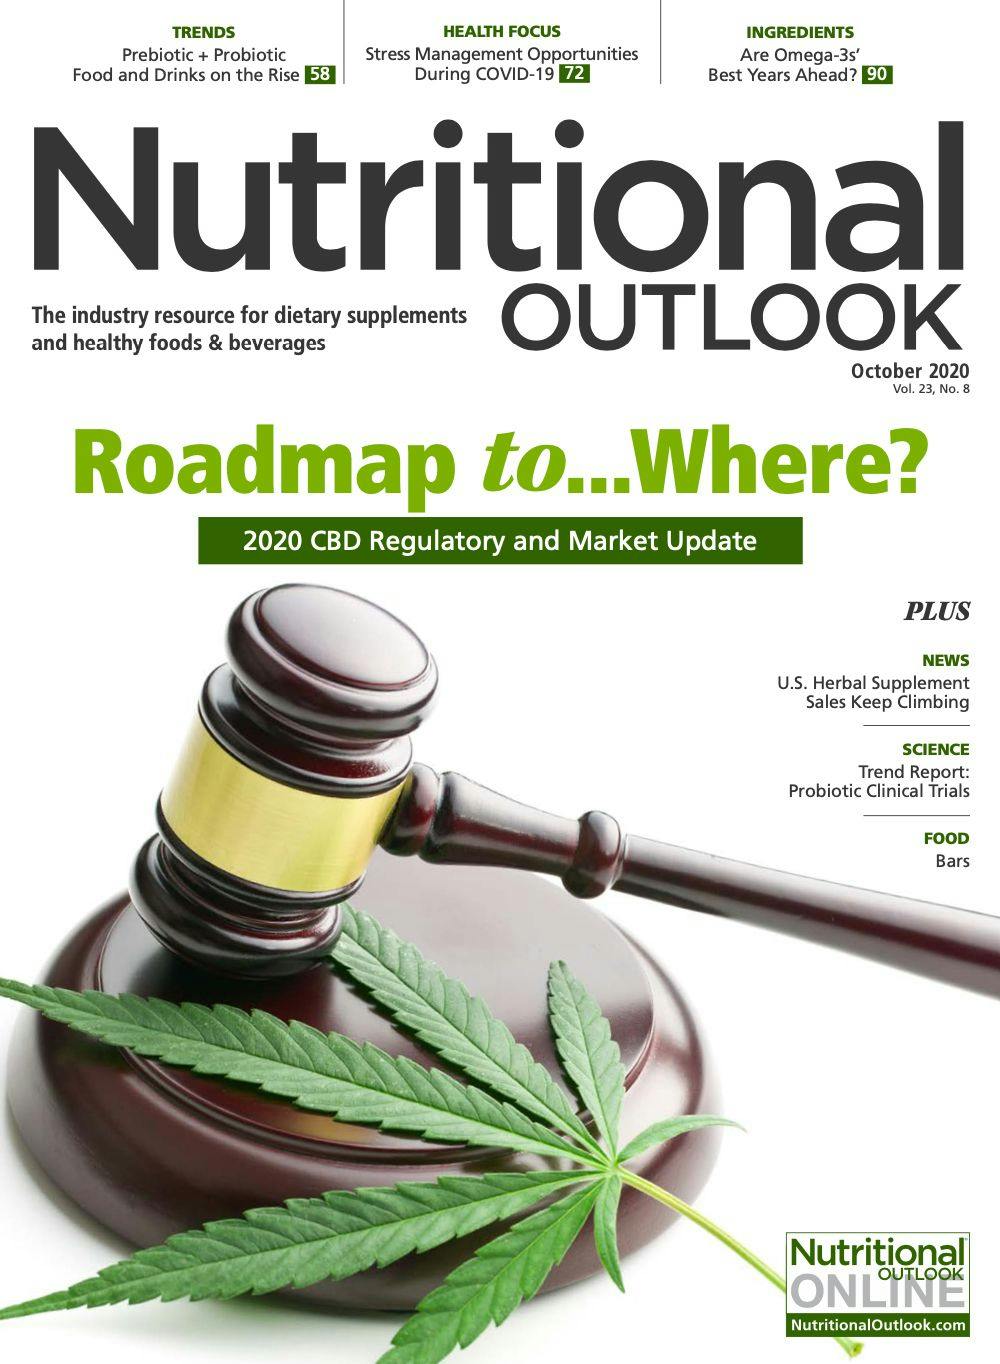 Nutritional Outlook Vol. 23 No. 8